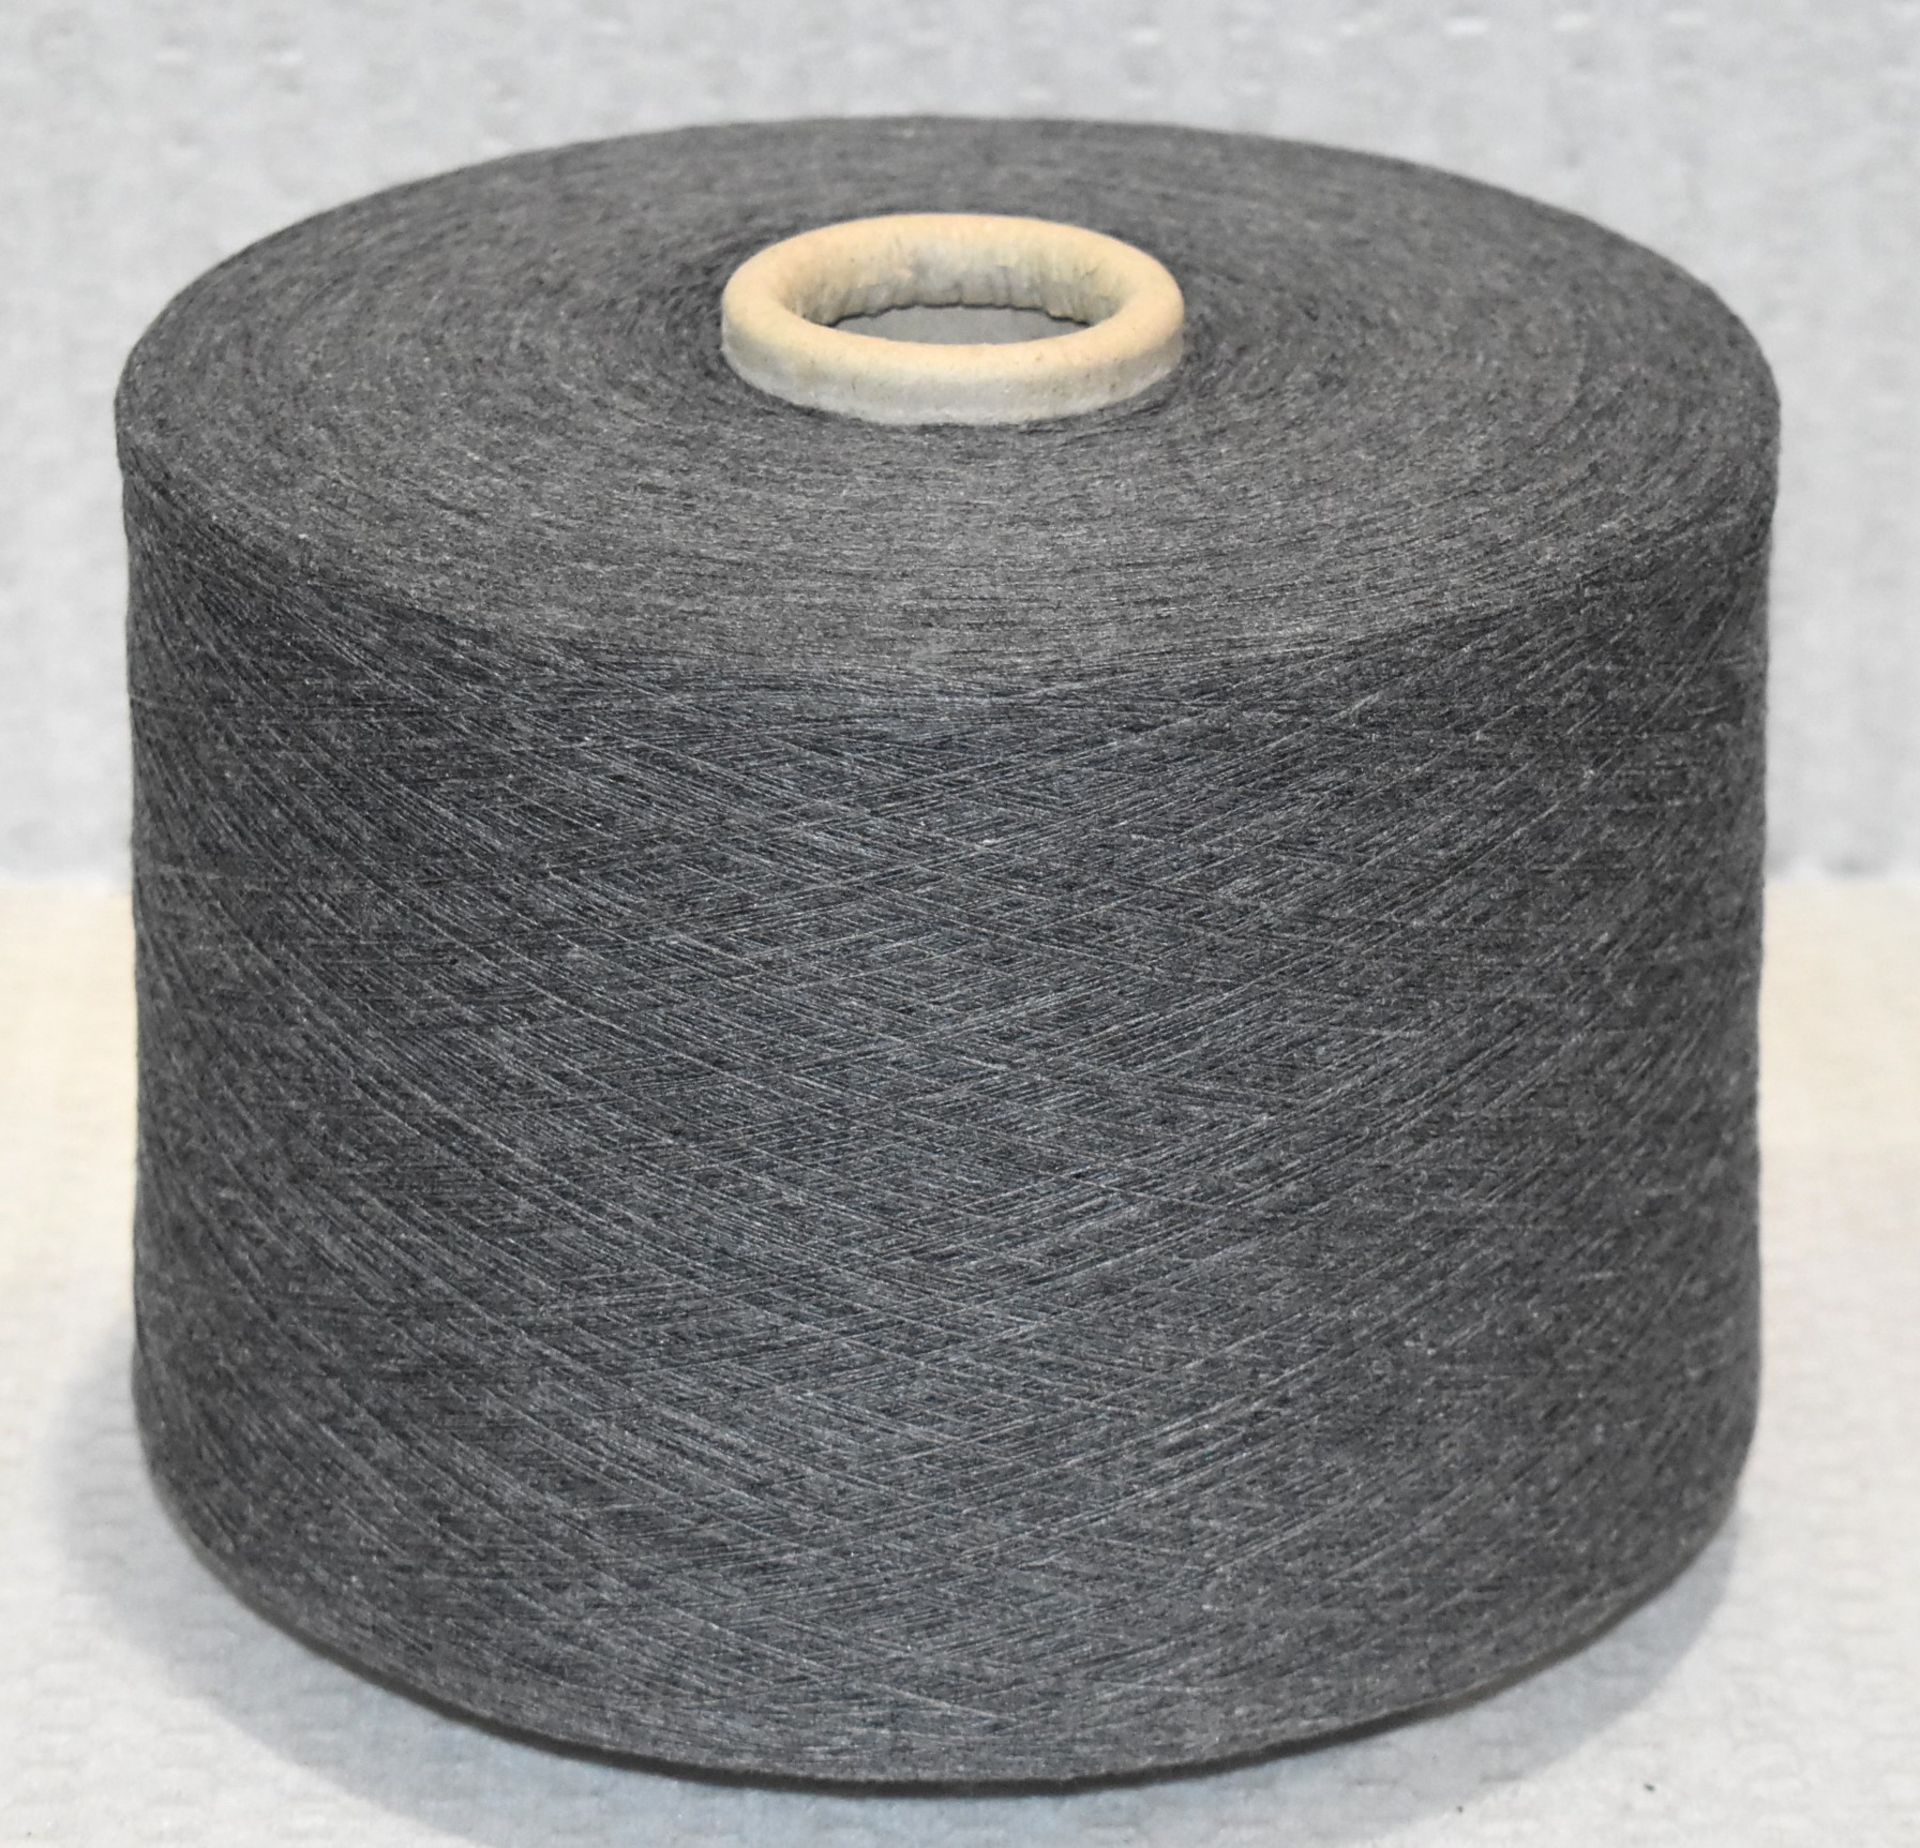 4 x Cones of 1/13 MicroCotton Knitting Yarn - Mid Grey - Approx Weight: 2,500g - New Stock ABL Yarn - Image 3 of 17